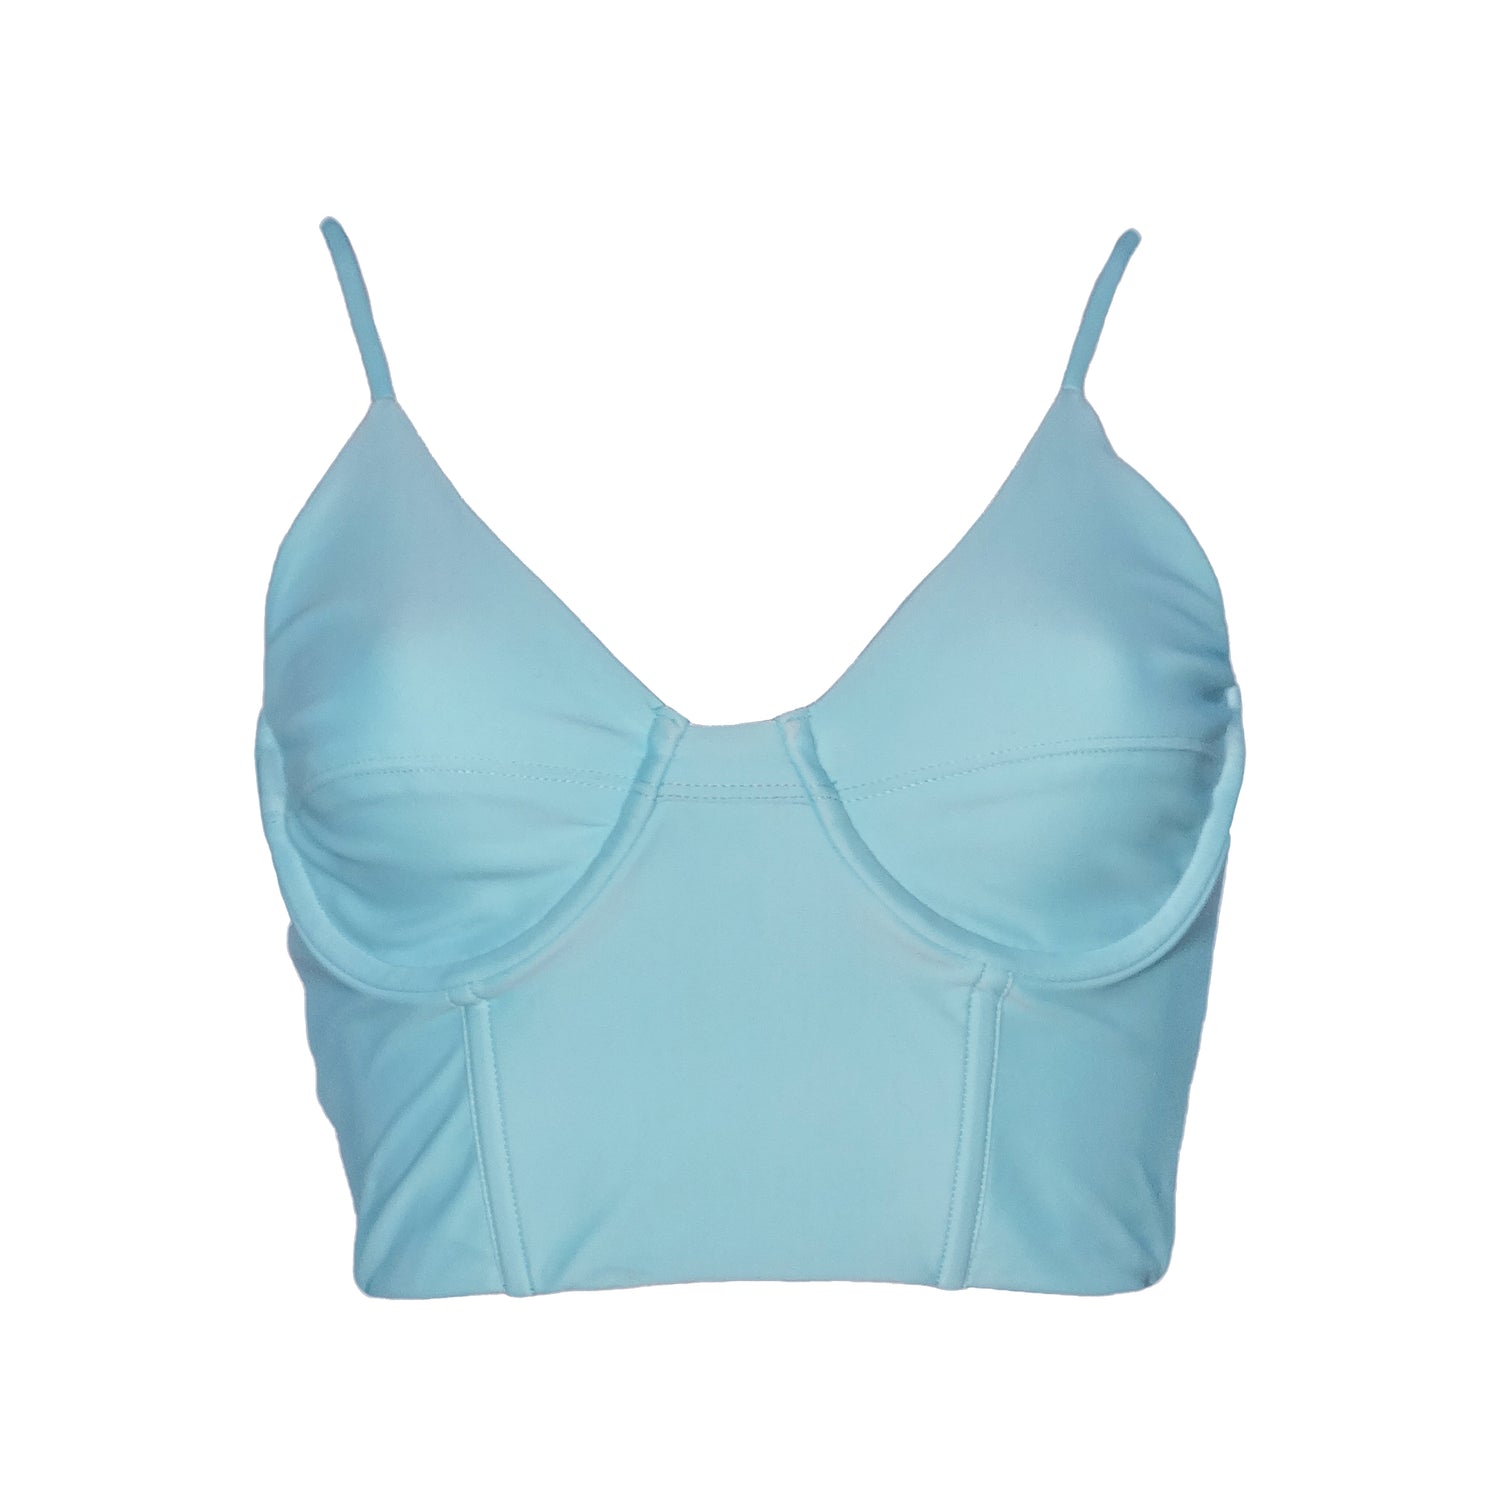 Ocean blue bustier bikini top with adjustable straps, underwire and princess seam boning. 